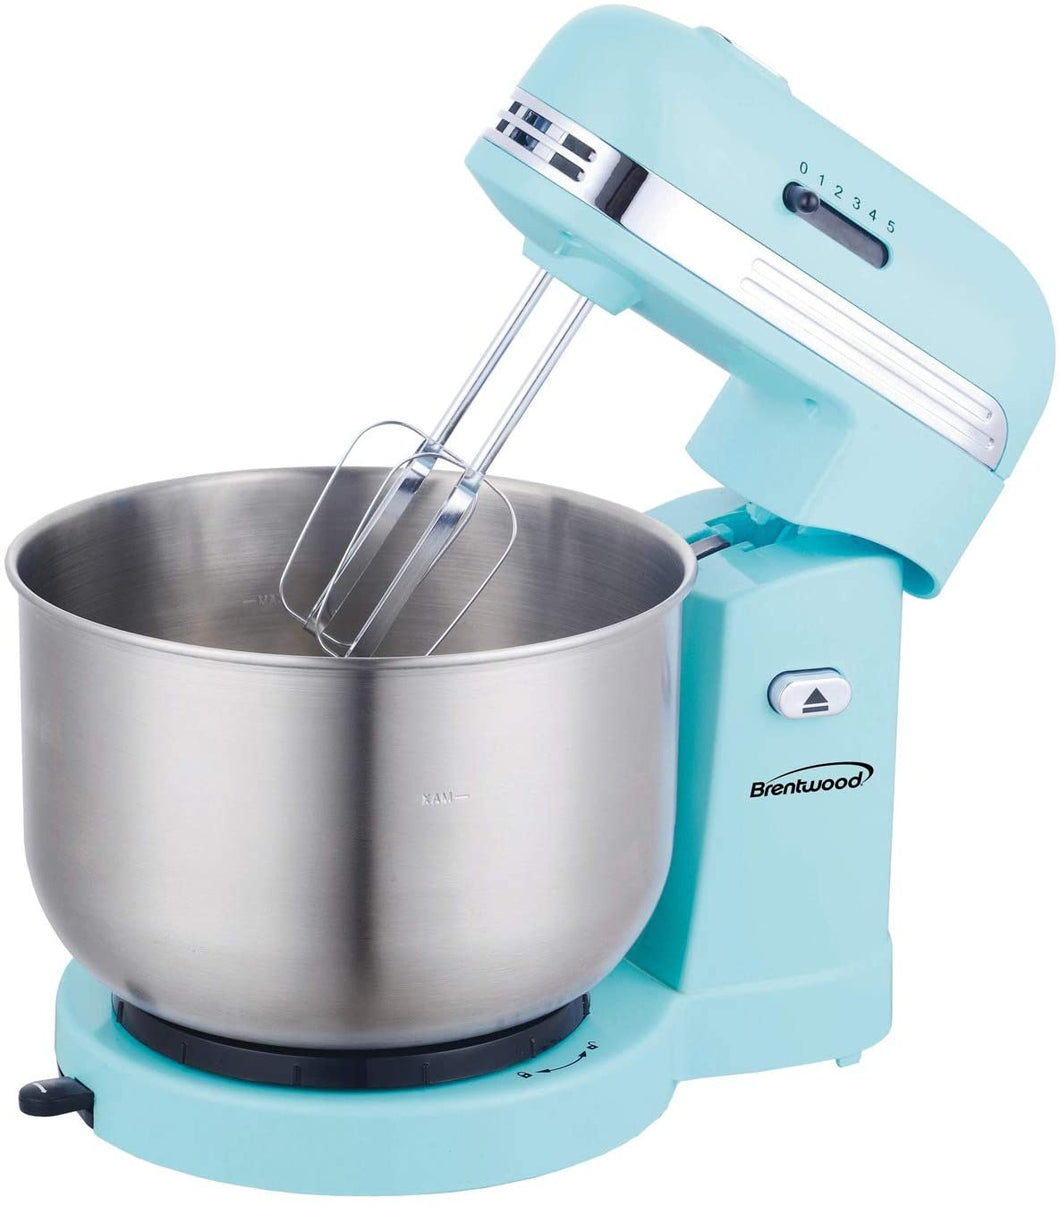 Brentwood 5-Speed Stand Mixer with 3 Quart Stainless Steel Mixing Bowl